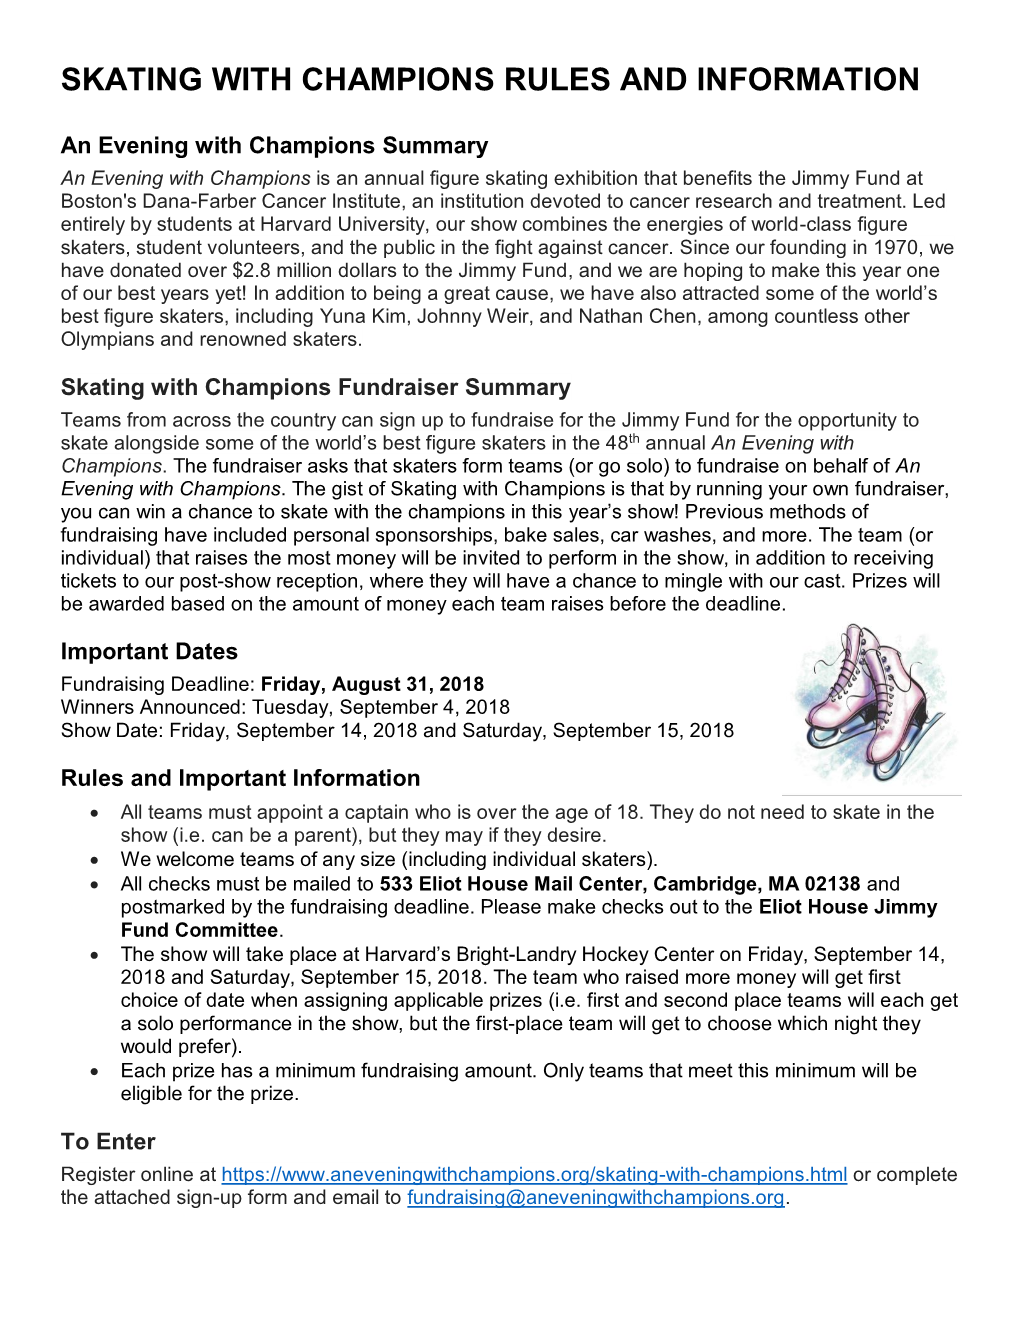 Skating with Champions Rules and Information